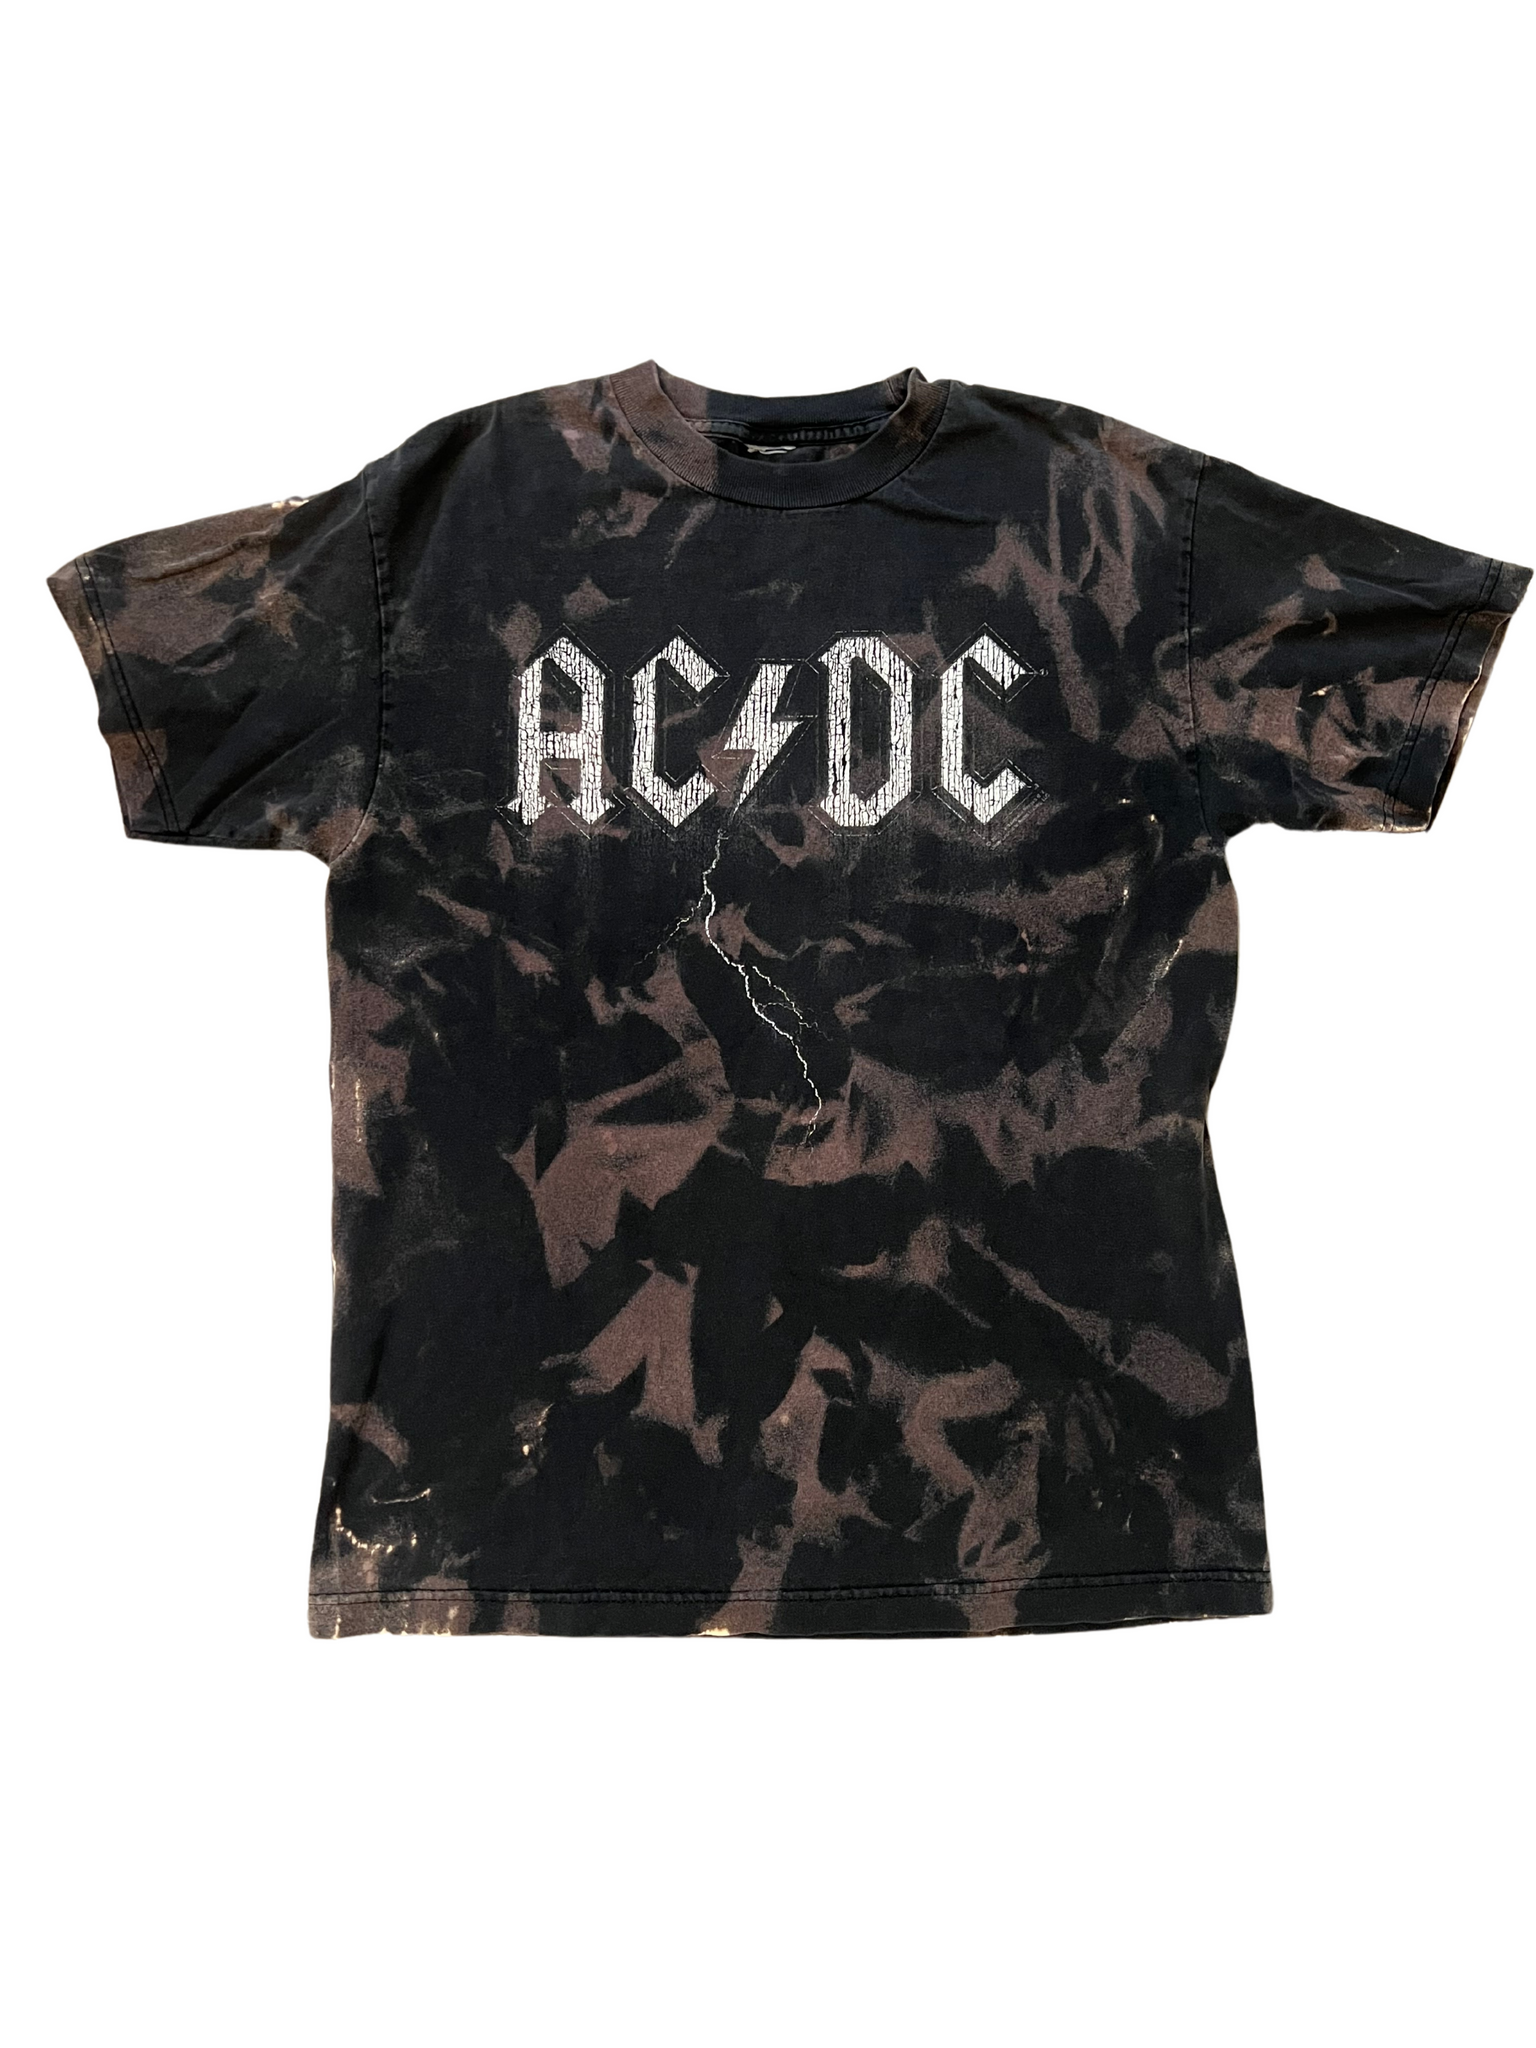 ACDC Bleached Shirt